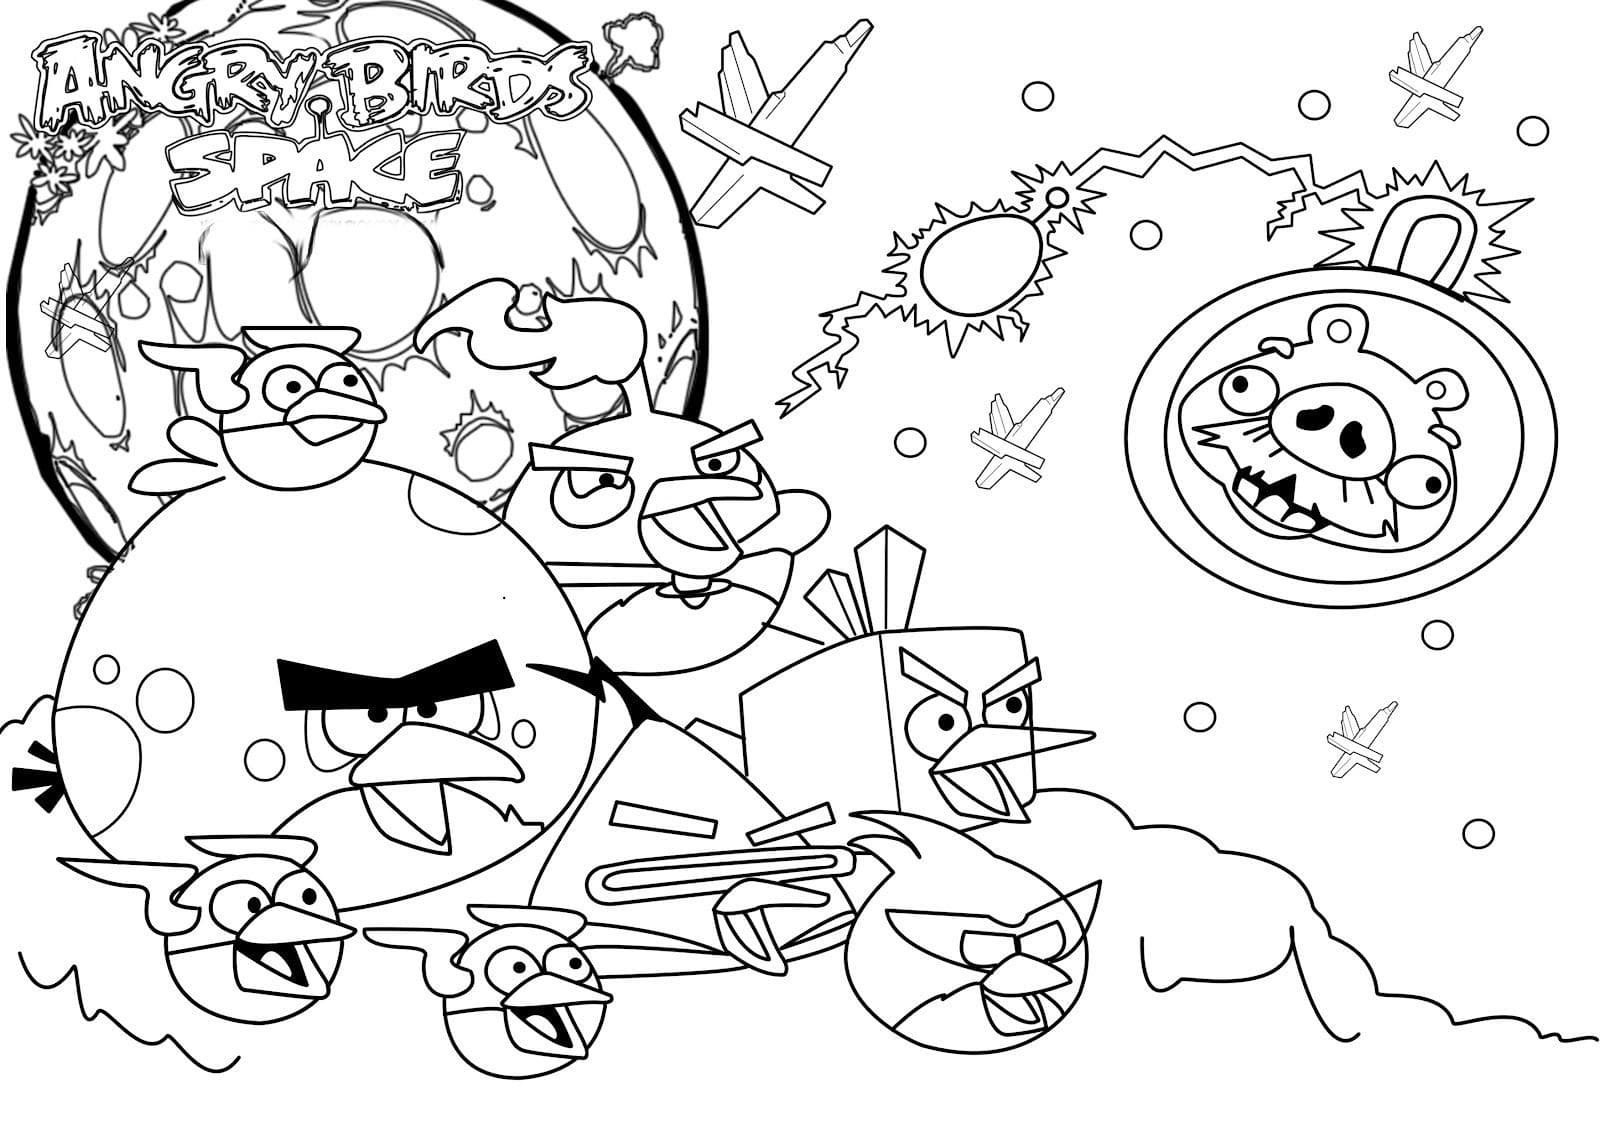 Coloring Pages Angry Birds. Print online for kids, best images